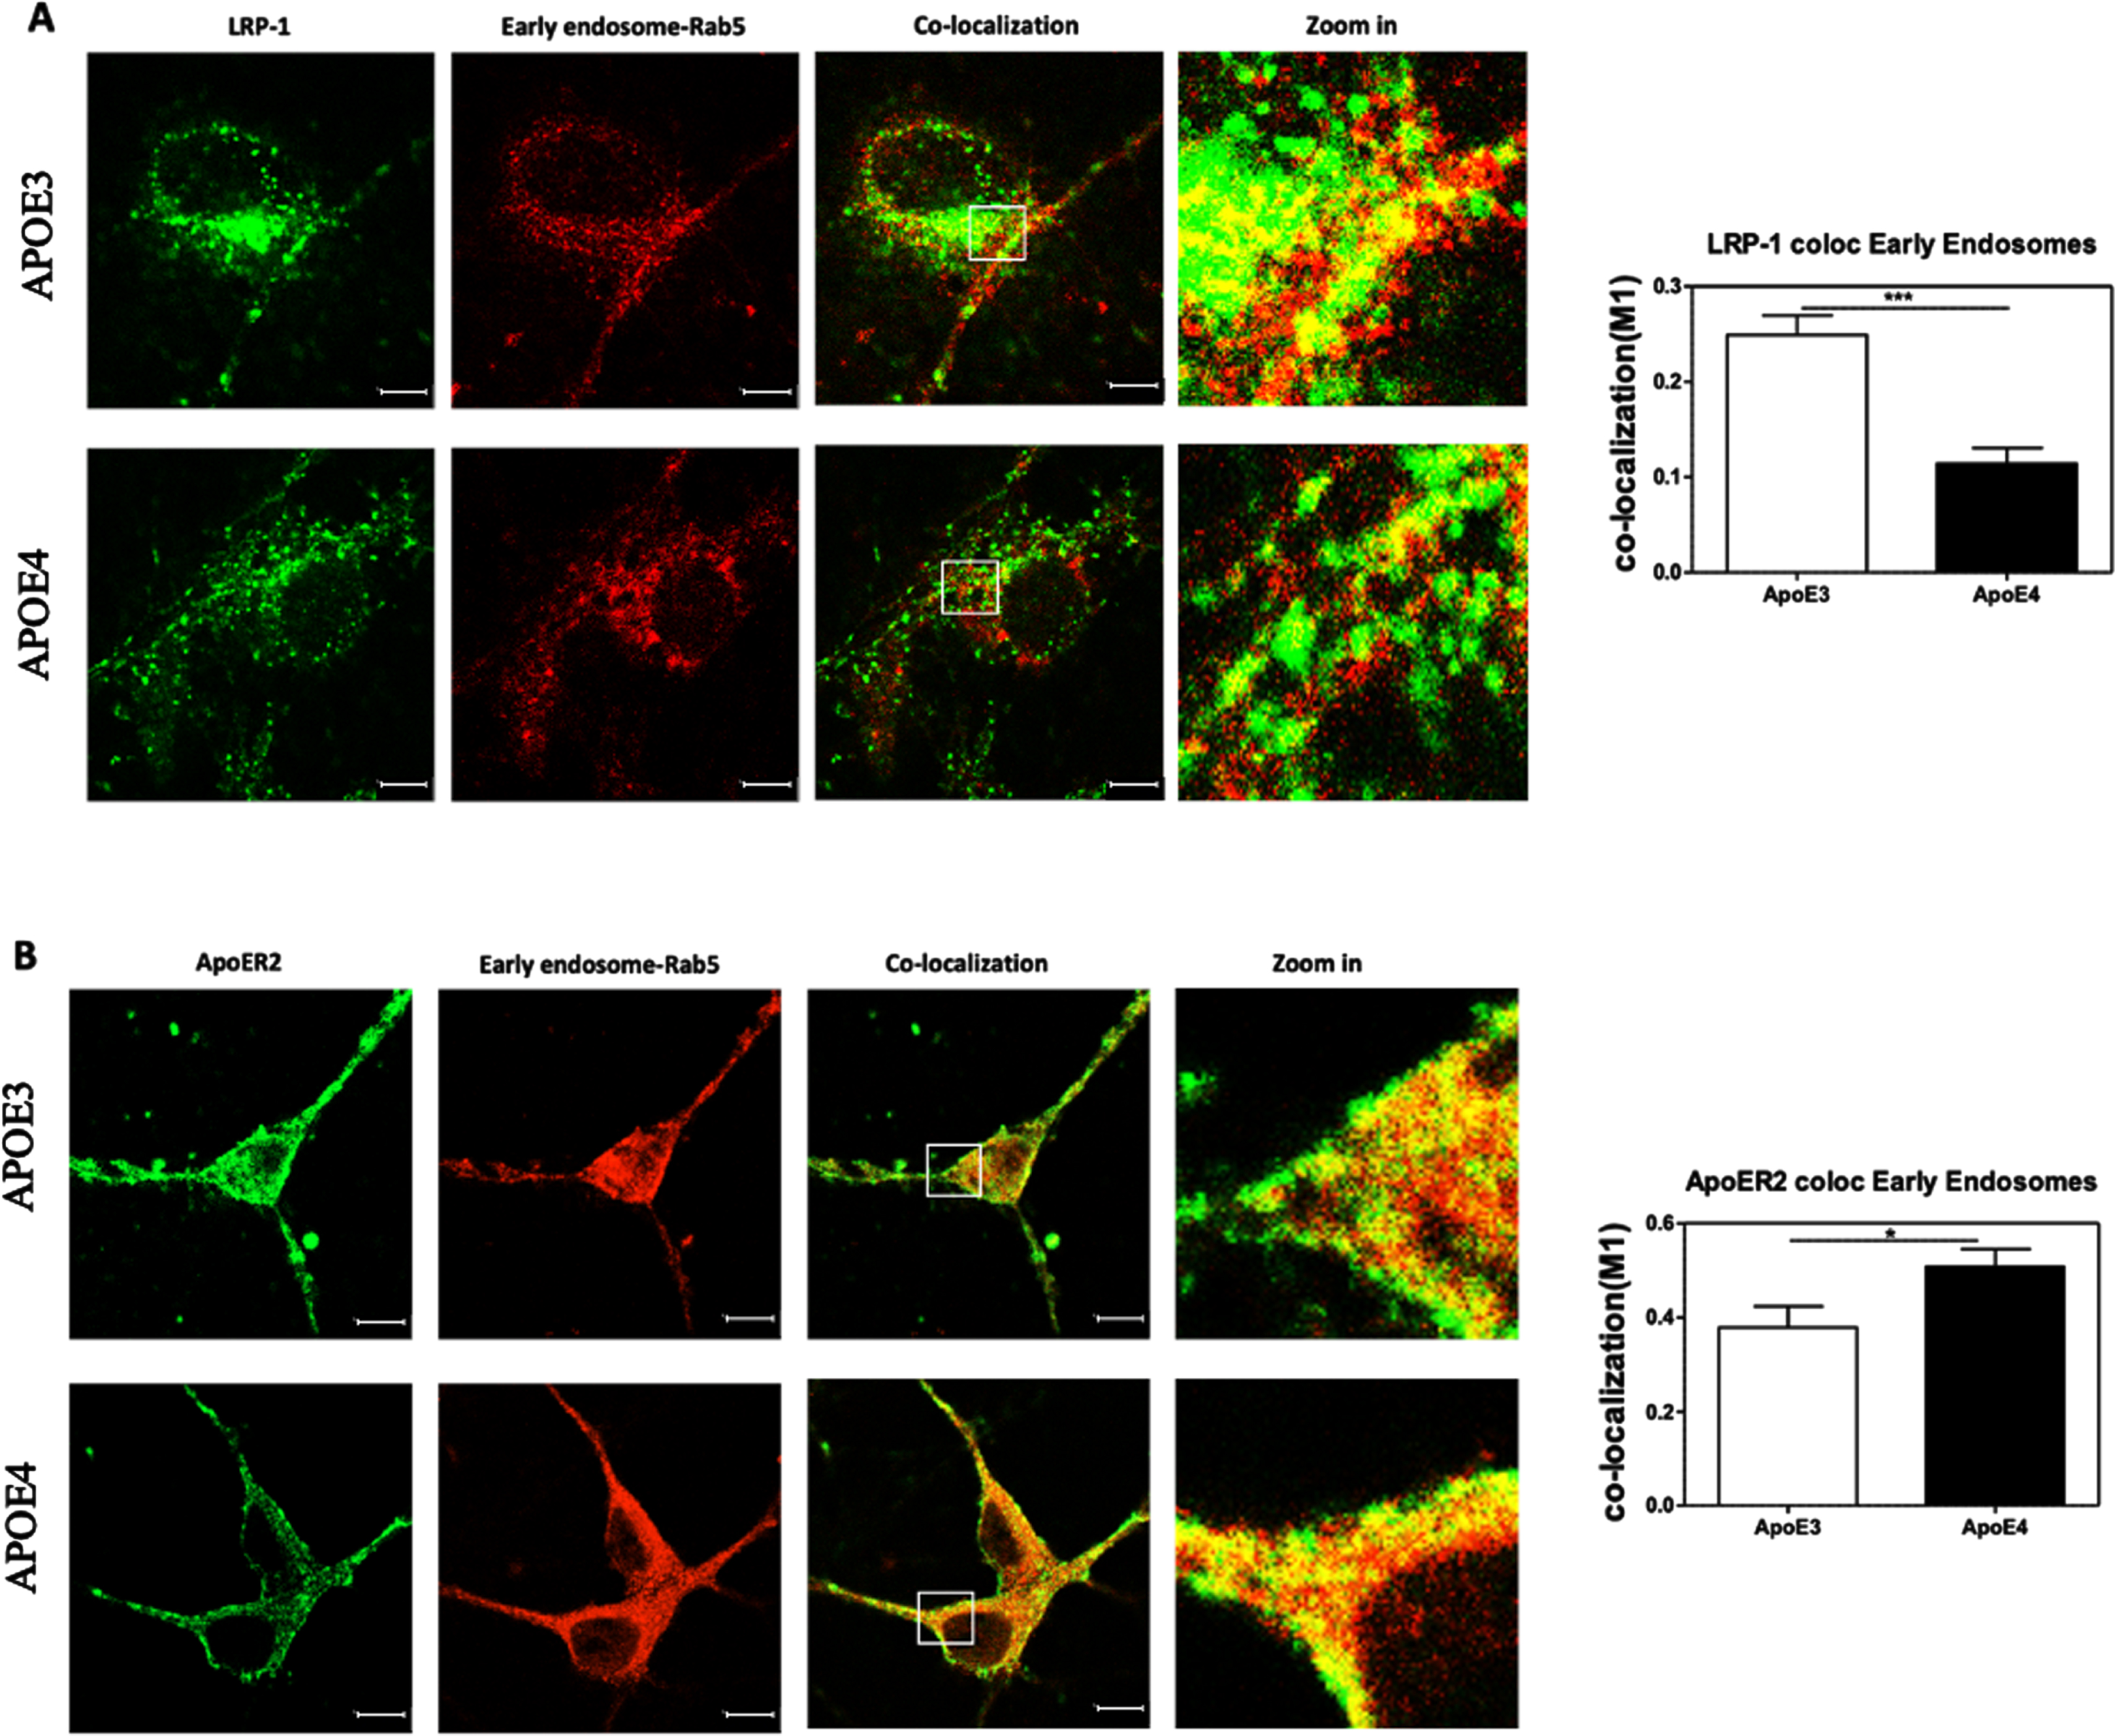 Colocalization of ApoE receptors with early endosomes. The total levels of both LRP1 and APOER2 were downregulated in APOE4 neurons when compared to APOE3 neurons (see representative figures on the left and in Fig. 2) In contrast, the area covered by the early endosomes staining was not affected by the APOE genotype (see Fig. 7). The extent of colocalization of LRP1 (A) and APOER2 (B) with the early endosomes were determined utilizing double staining and confocal microscopy, followed by M1 colocalization analysis. Representative images, shown on the left side of the figure whereas the quantified results are shown on the right. The results revealed that LRP1 was significantly more localized to the early endosomes in APOE3 neurons (0.24±0.02) than the APOE4 neurons (0.11±0.01, p < 0.001), while APOER2 showed an opposite effect where the receptors were significantly more localized with the early endosomes in APOE4 (0.50±0.04) than the APOE3 neurons (0.37±0.037, p < 0.05). The scalebar on the images indicate 10μm. *p < 0.05, ***p < 0.001.